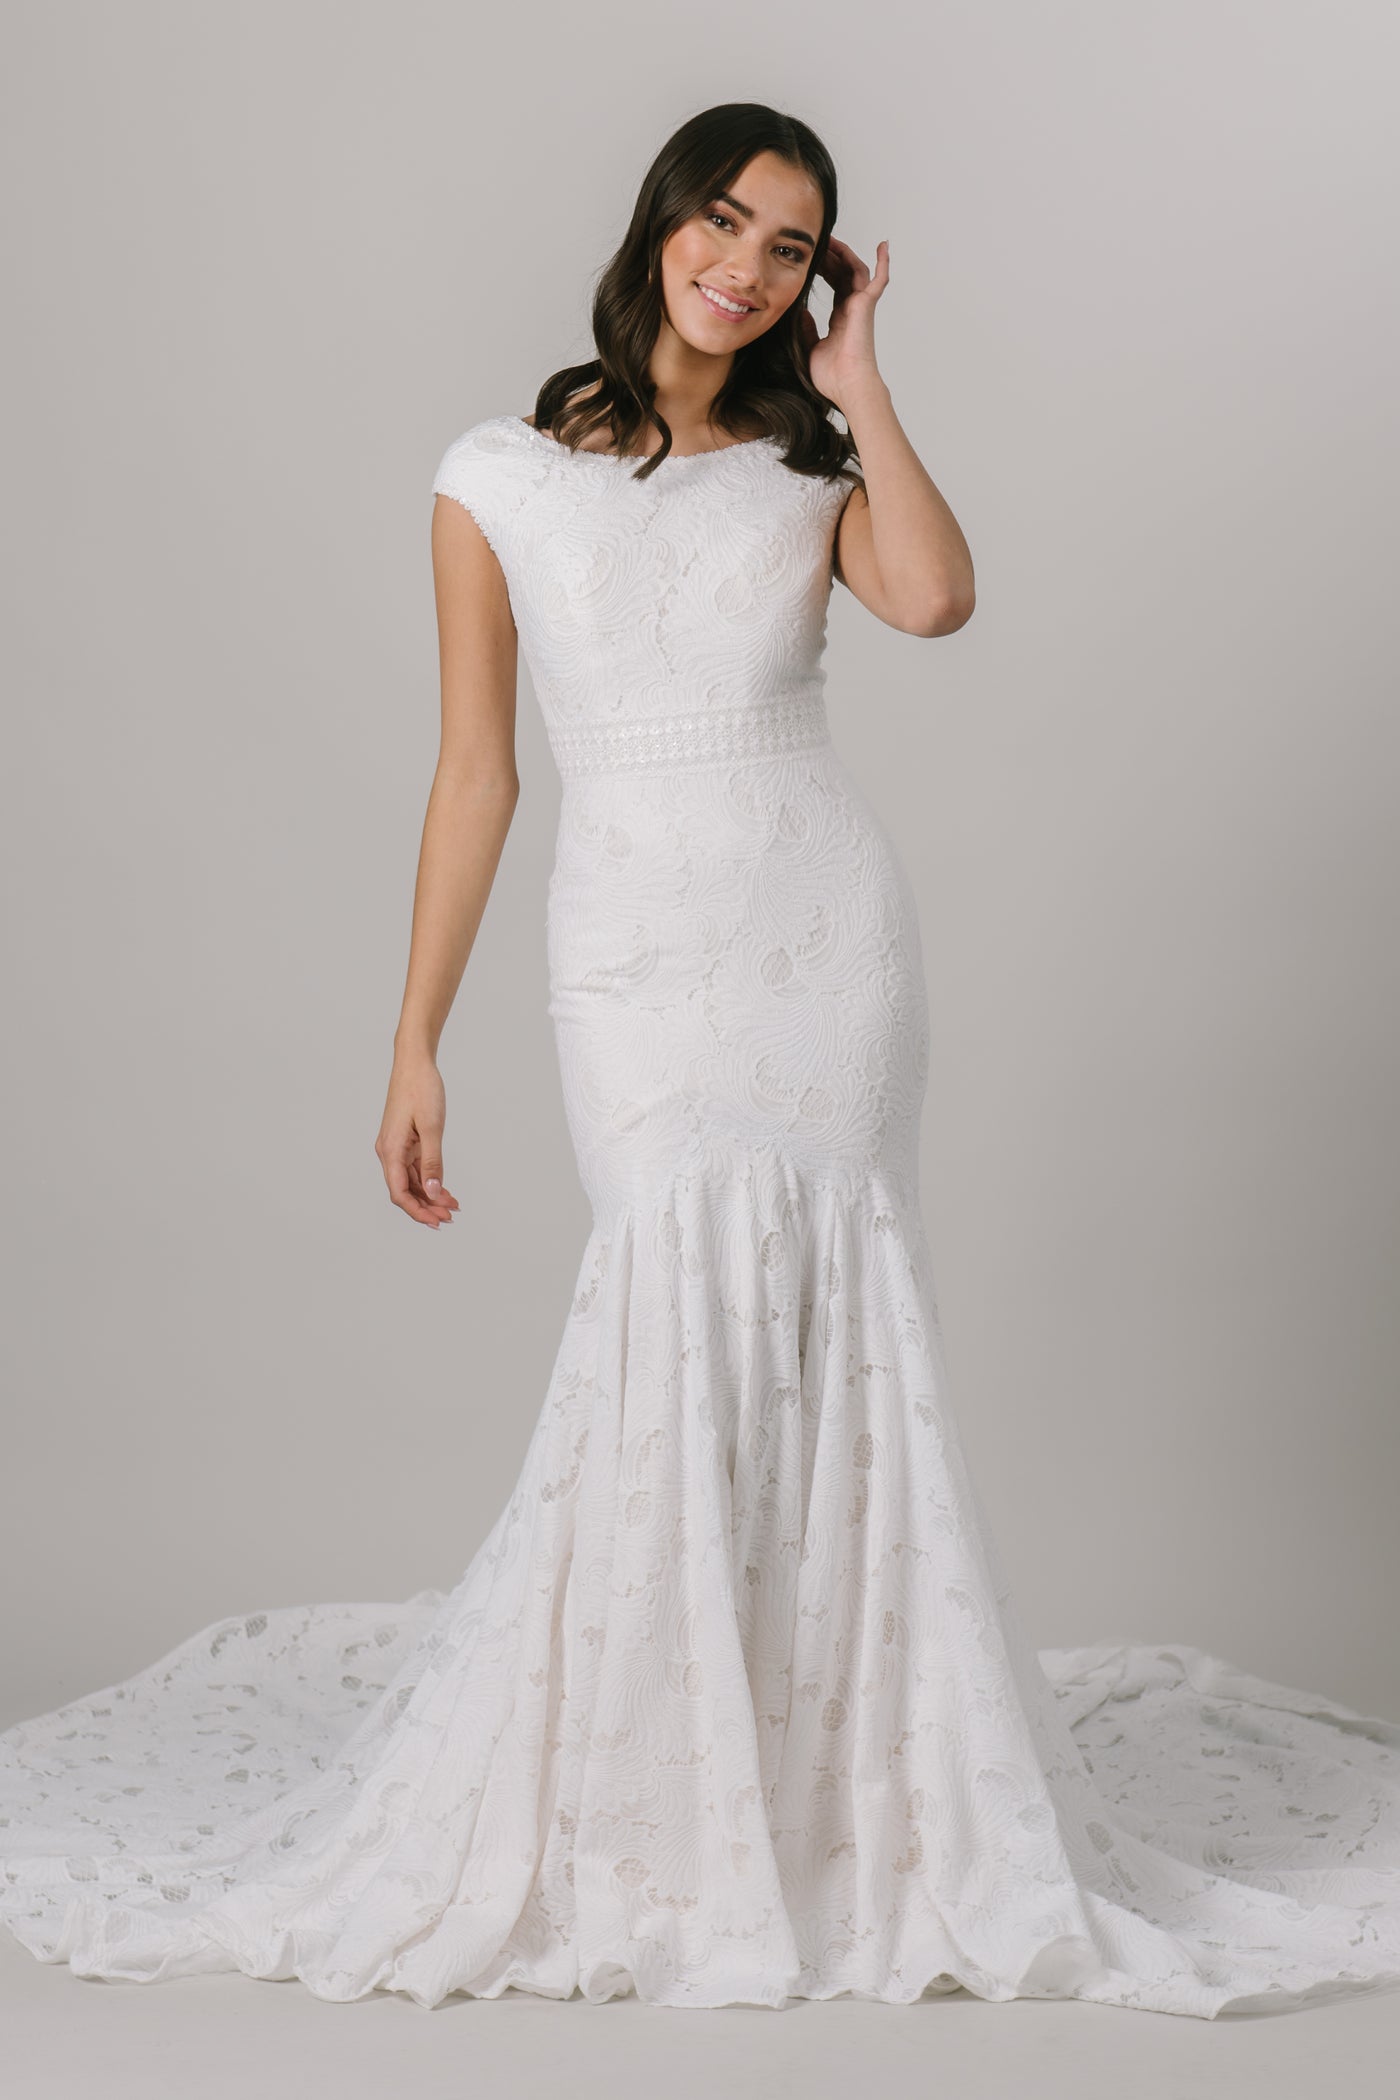 Fall in love with lace all over again! This stunning modest wedding dress features a sophisticated lace pattern, flattering fit-and-flare silhouette and an accentuated waistband that everyone loves!   Shown in Sand/Ivory.